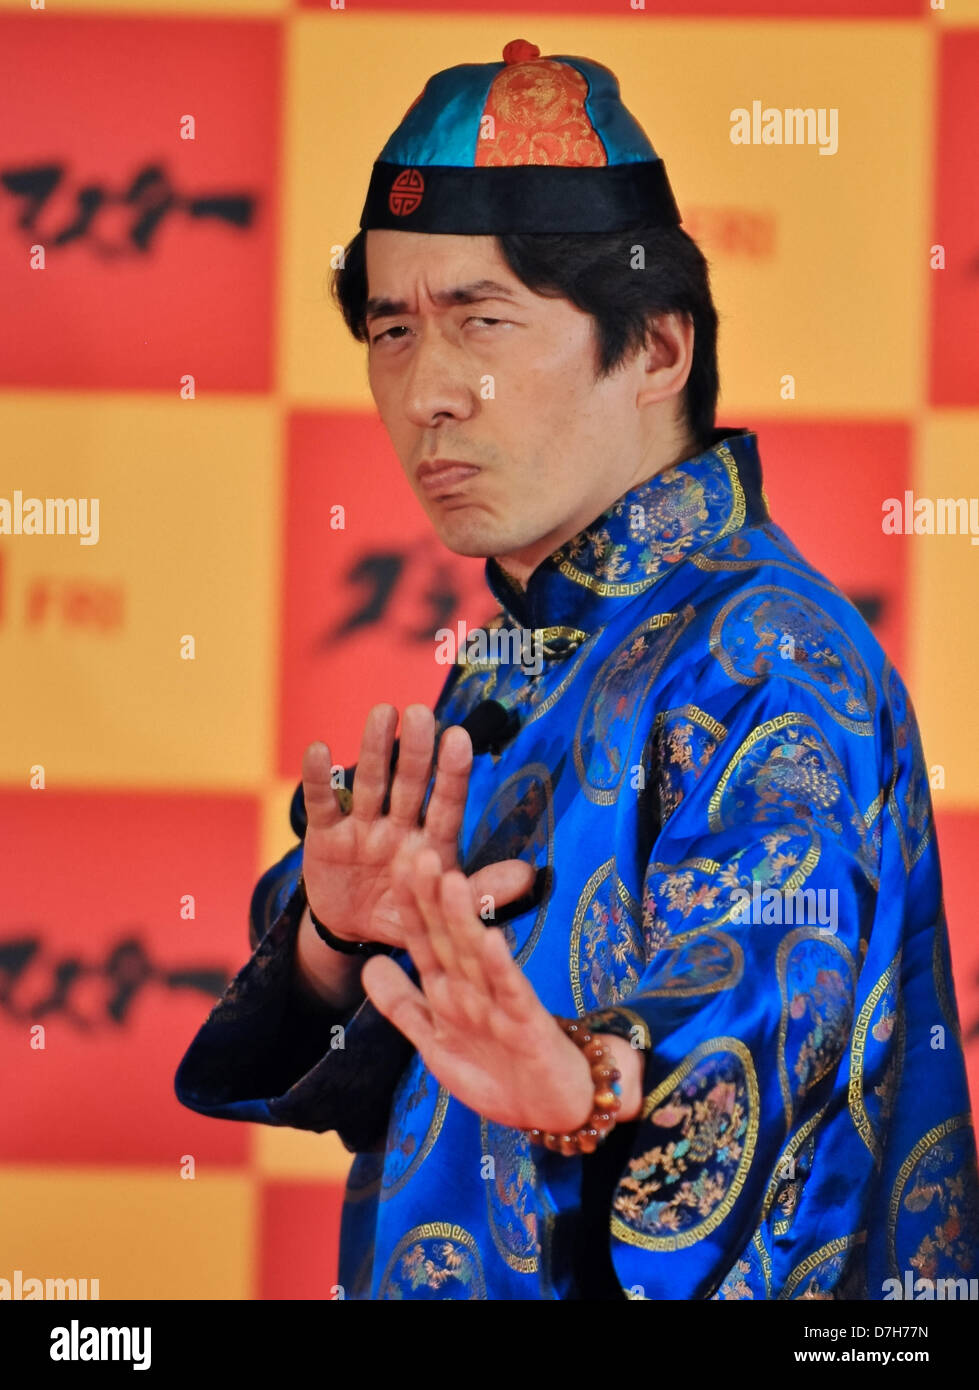 Tokyo, Japan. 7th May 2013. Jimon Terakado(Dacho club. Member of Comedian Group Dach Club, Jimon Terakado attends an event for 'The Grandmaster' in Tokyo, Japan, on May 7, 2013. The film will open on May 31 in Japan. (Photo by AFLO/Alamy Live News) Stock Photo